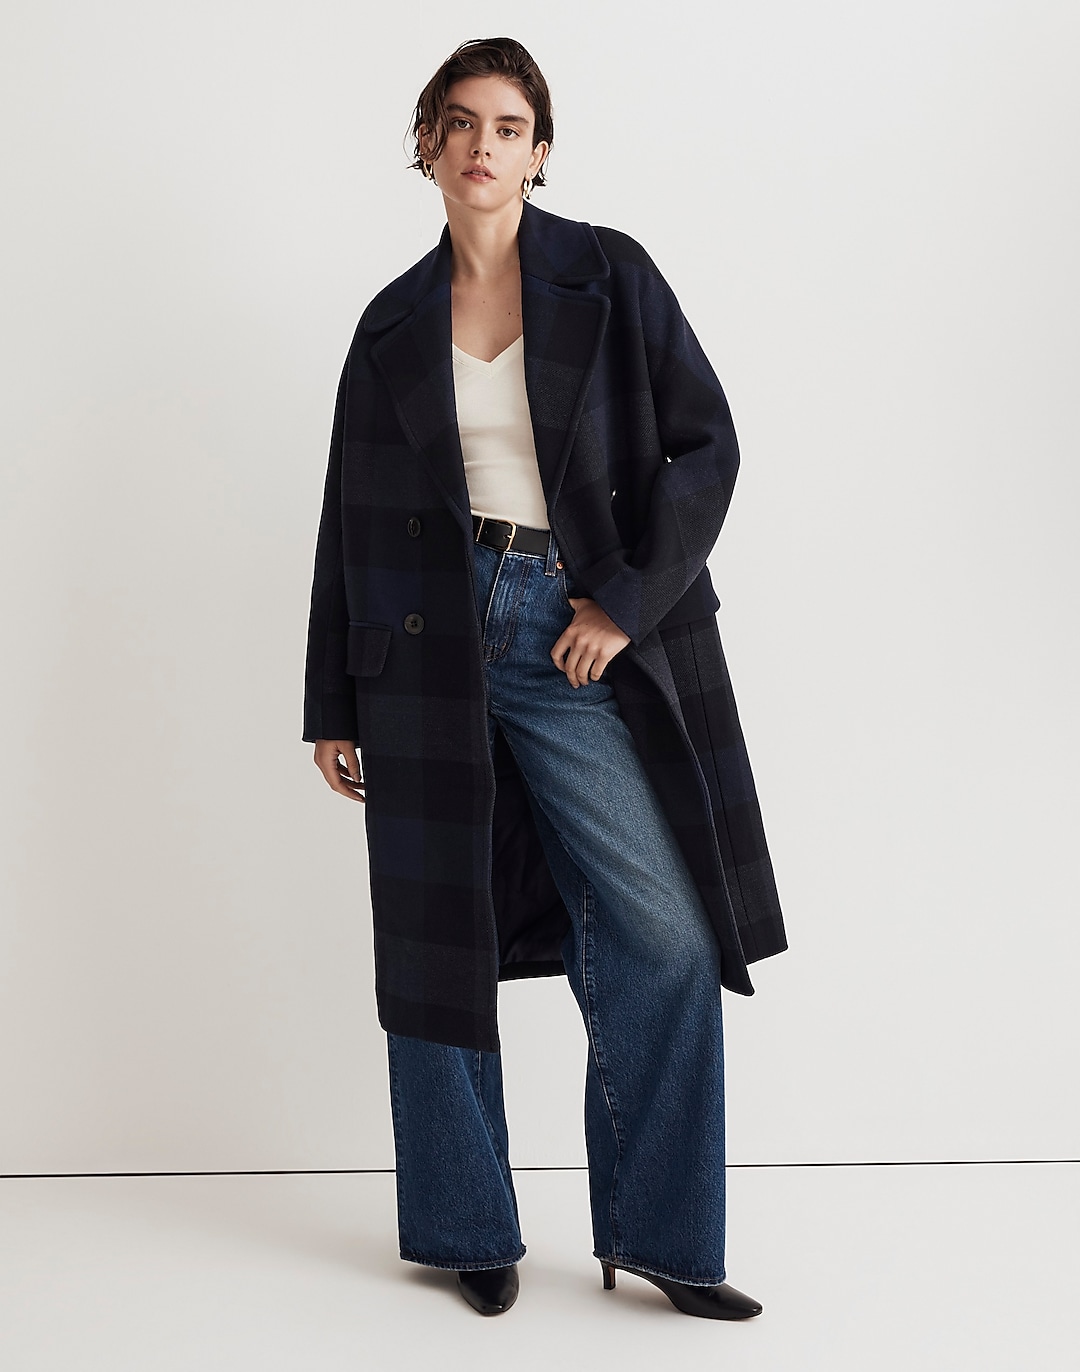 The Gianna Coat in Plaid Insuluxe Fabric | Madewell